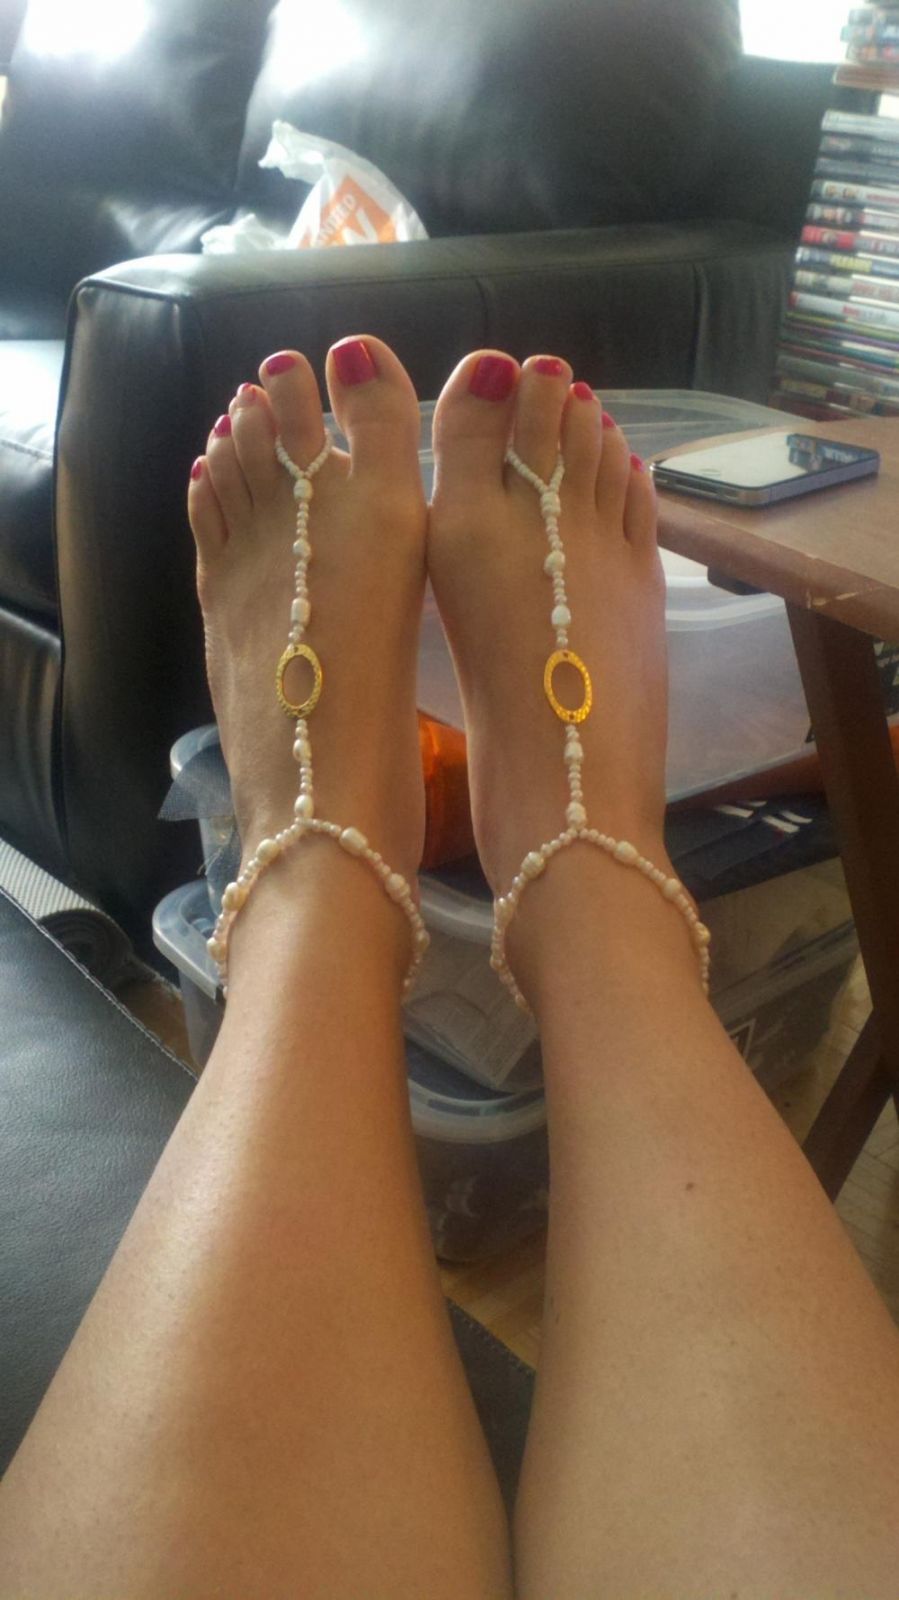 Share your DIY Barefoot Sandals/Photos Here! 